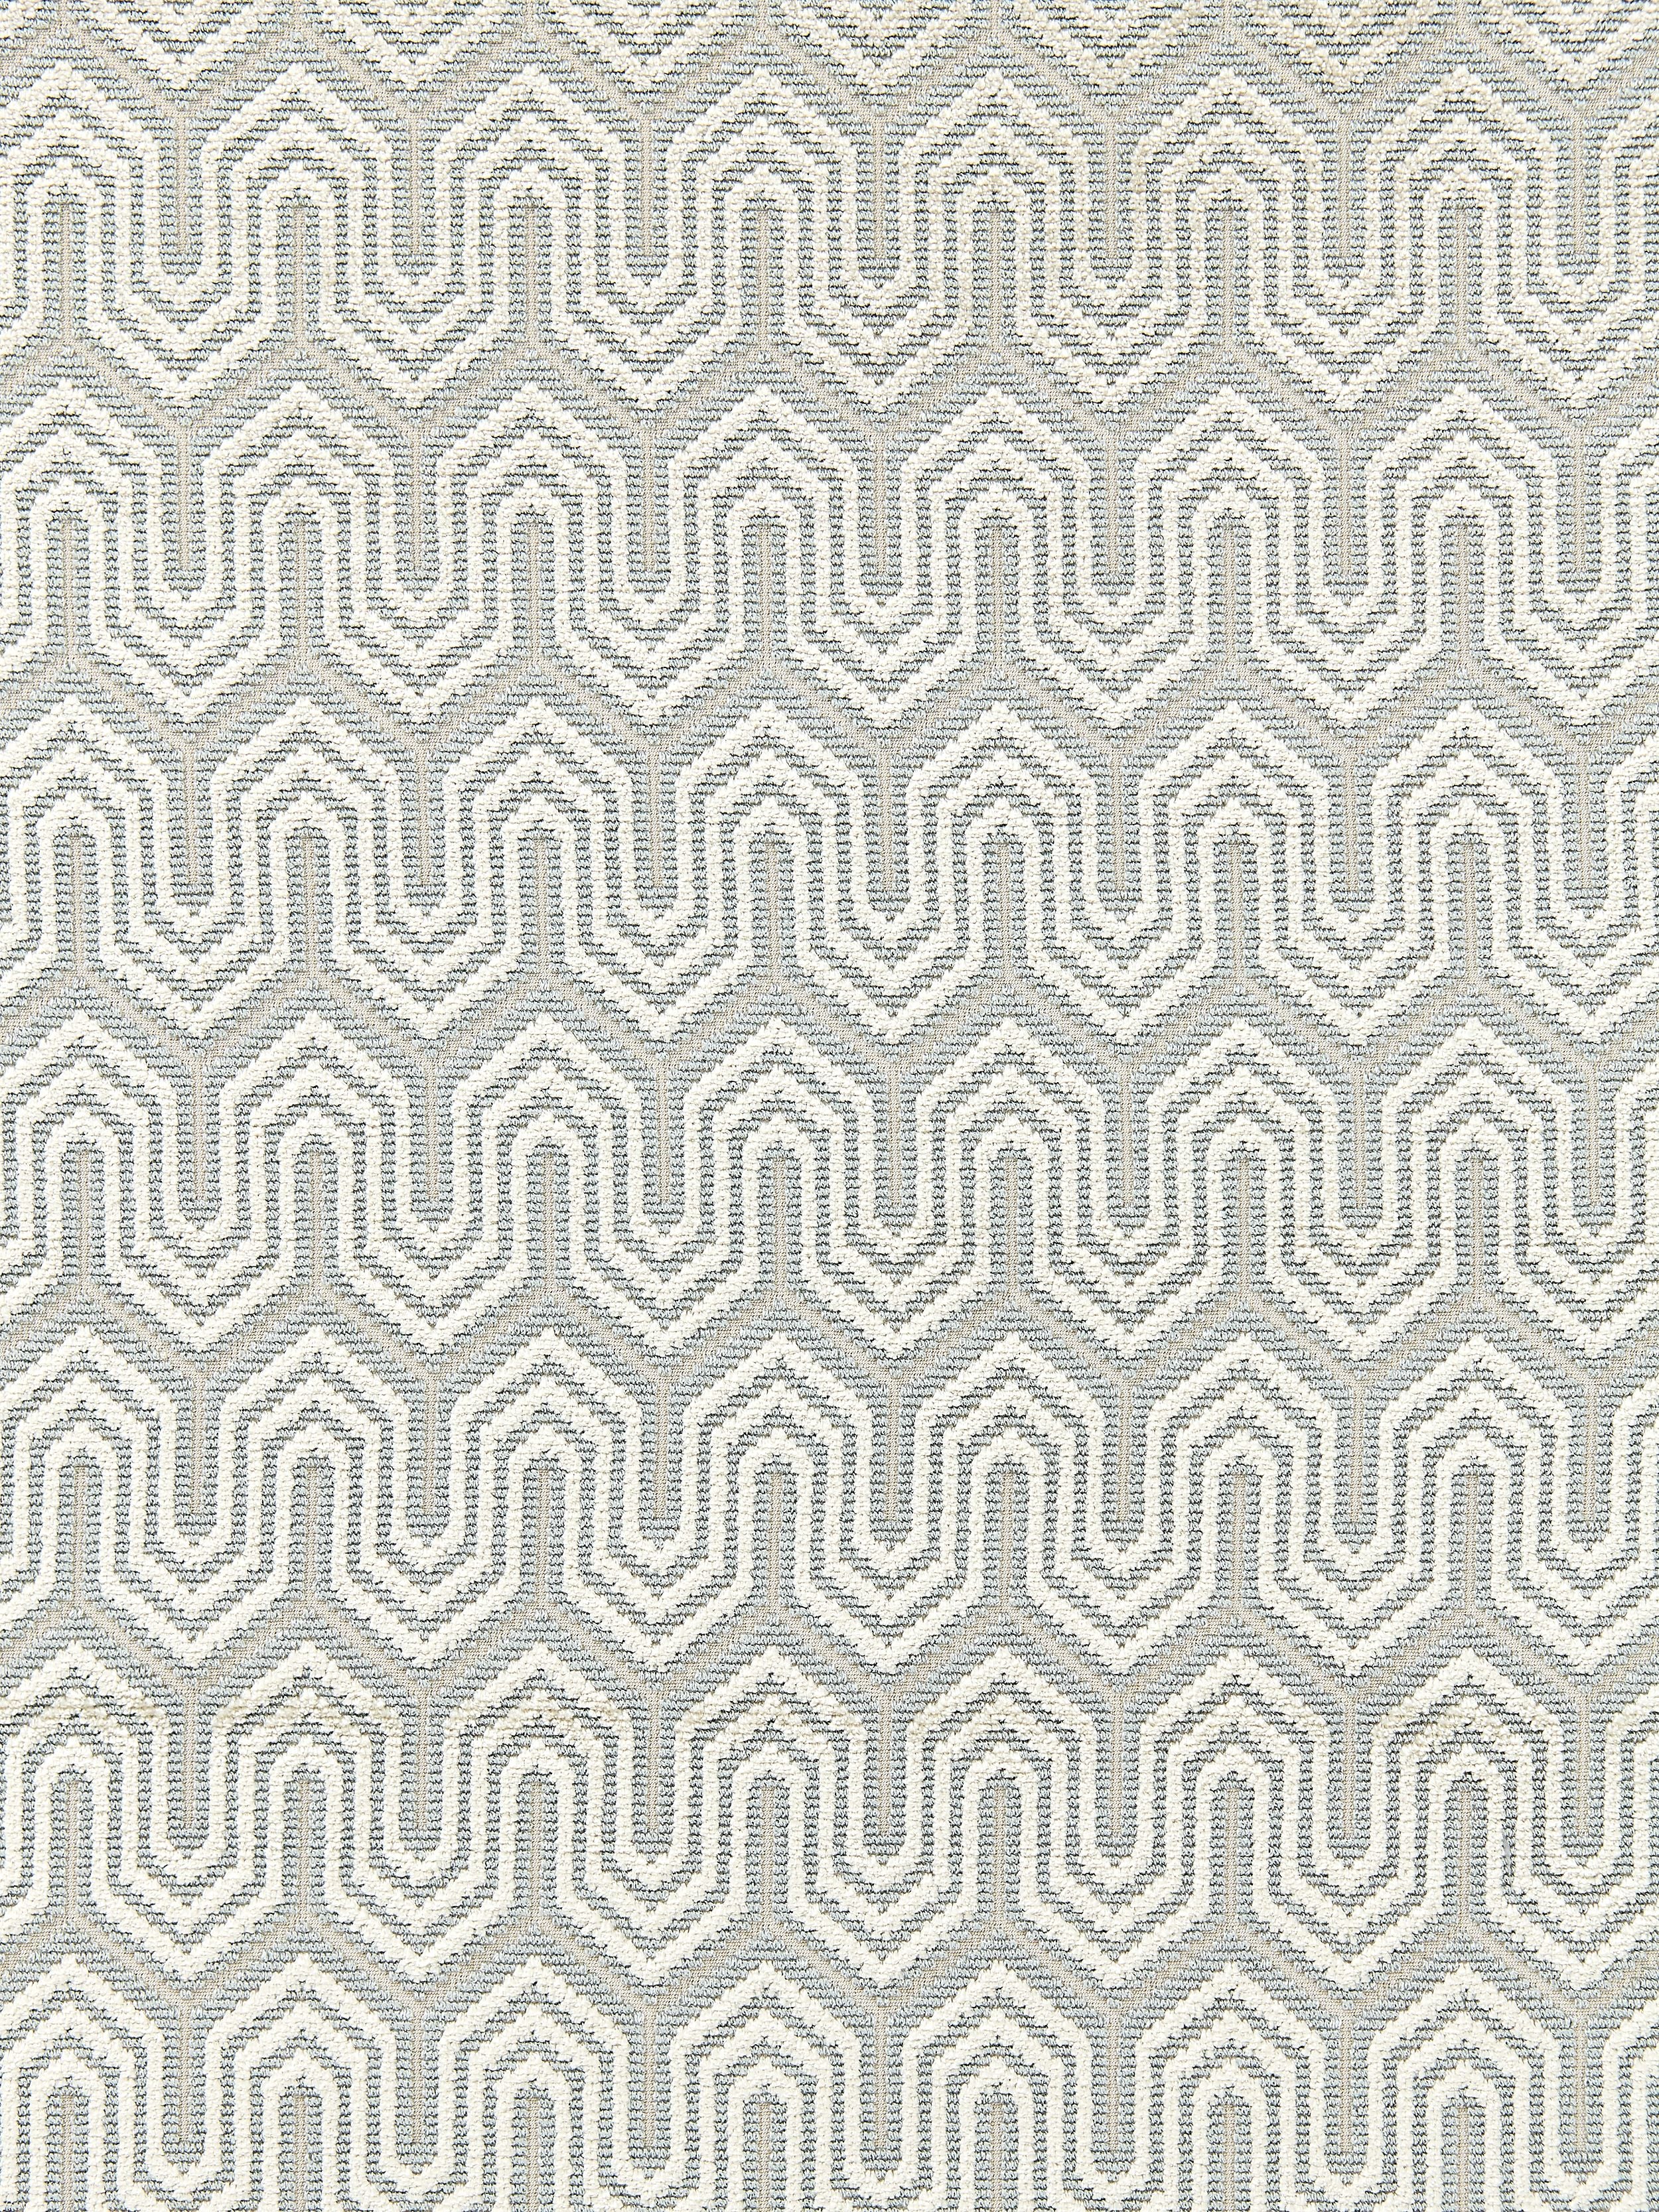 Undulation fabric in mineral color - pattern number SC 000227129 - by Scalamandre in the Scalamandre Fabrics Book 1 collection